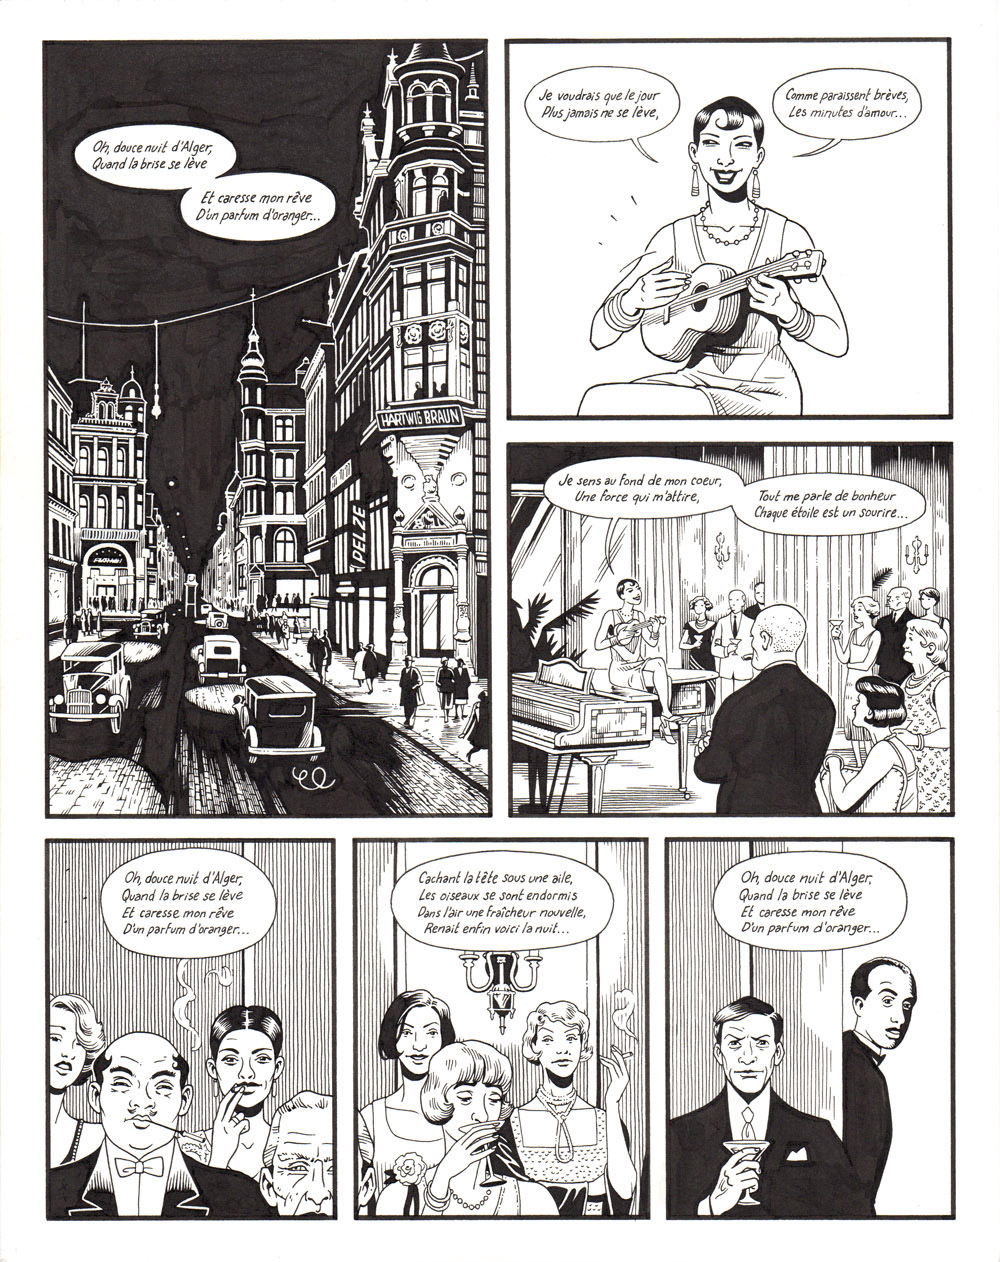 Berlin - page 255-257 Book Two: City of Smoke - page 057-59